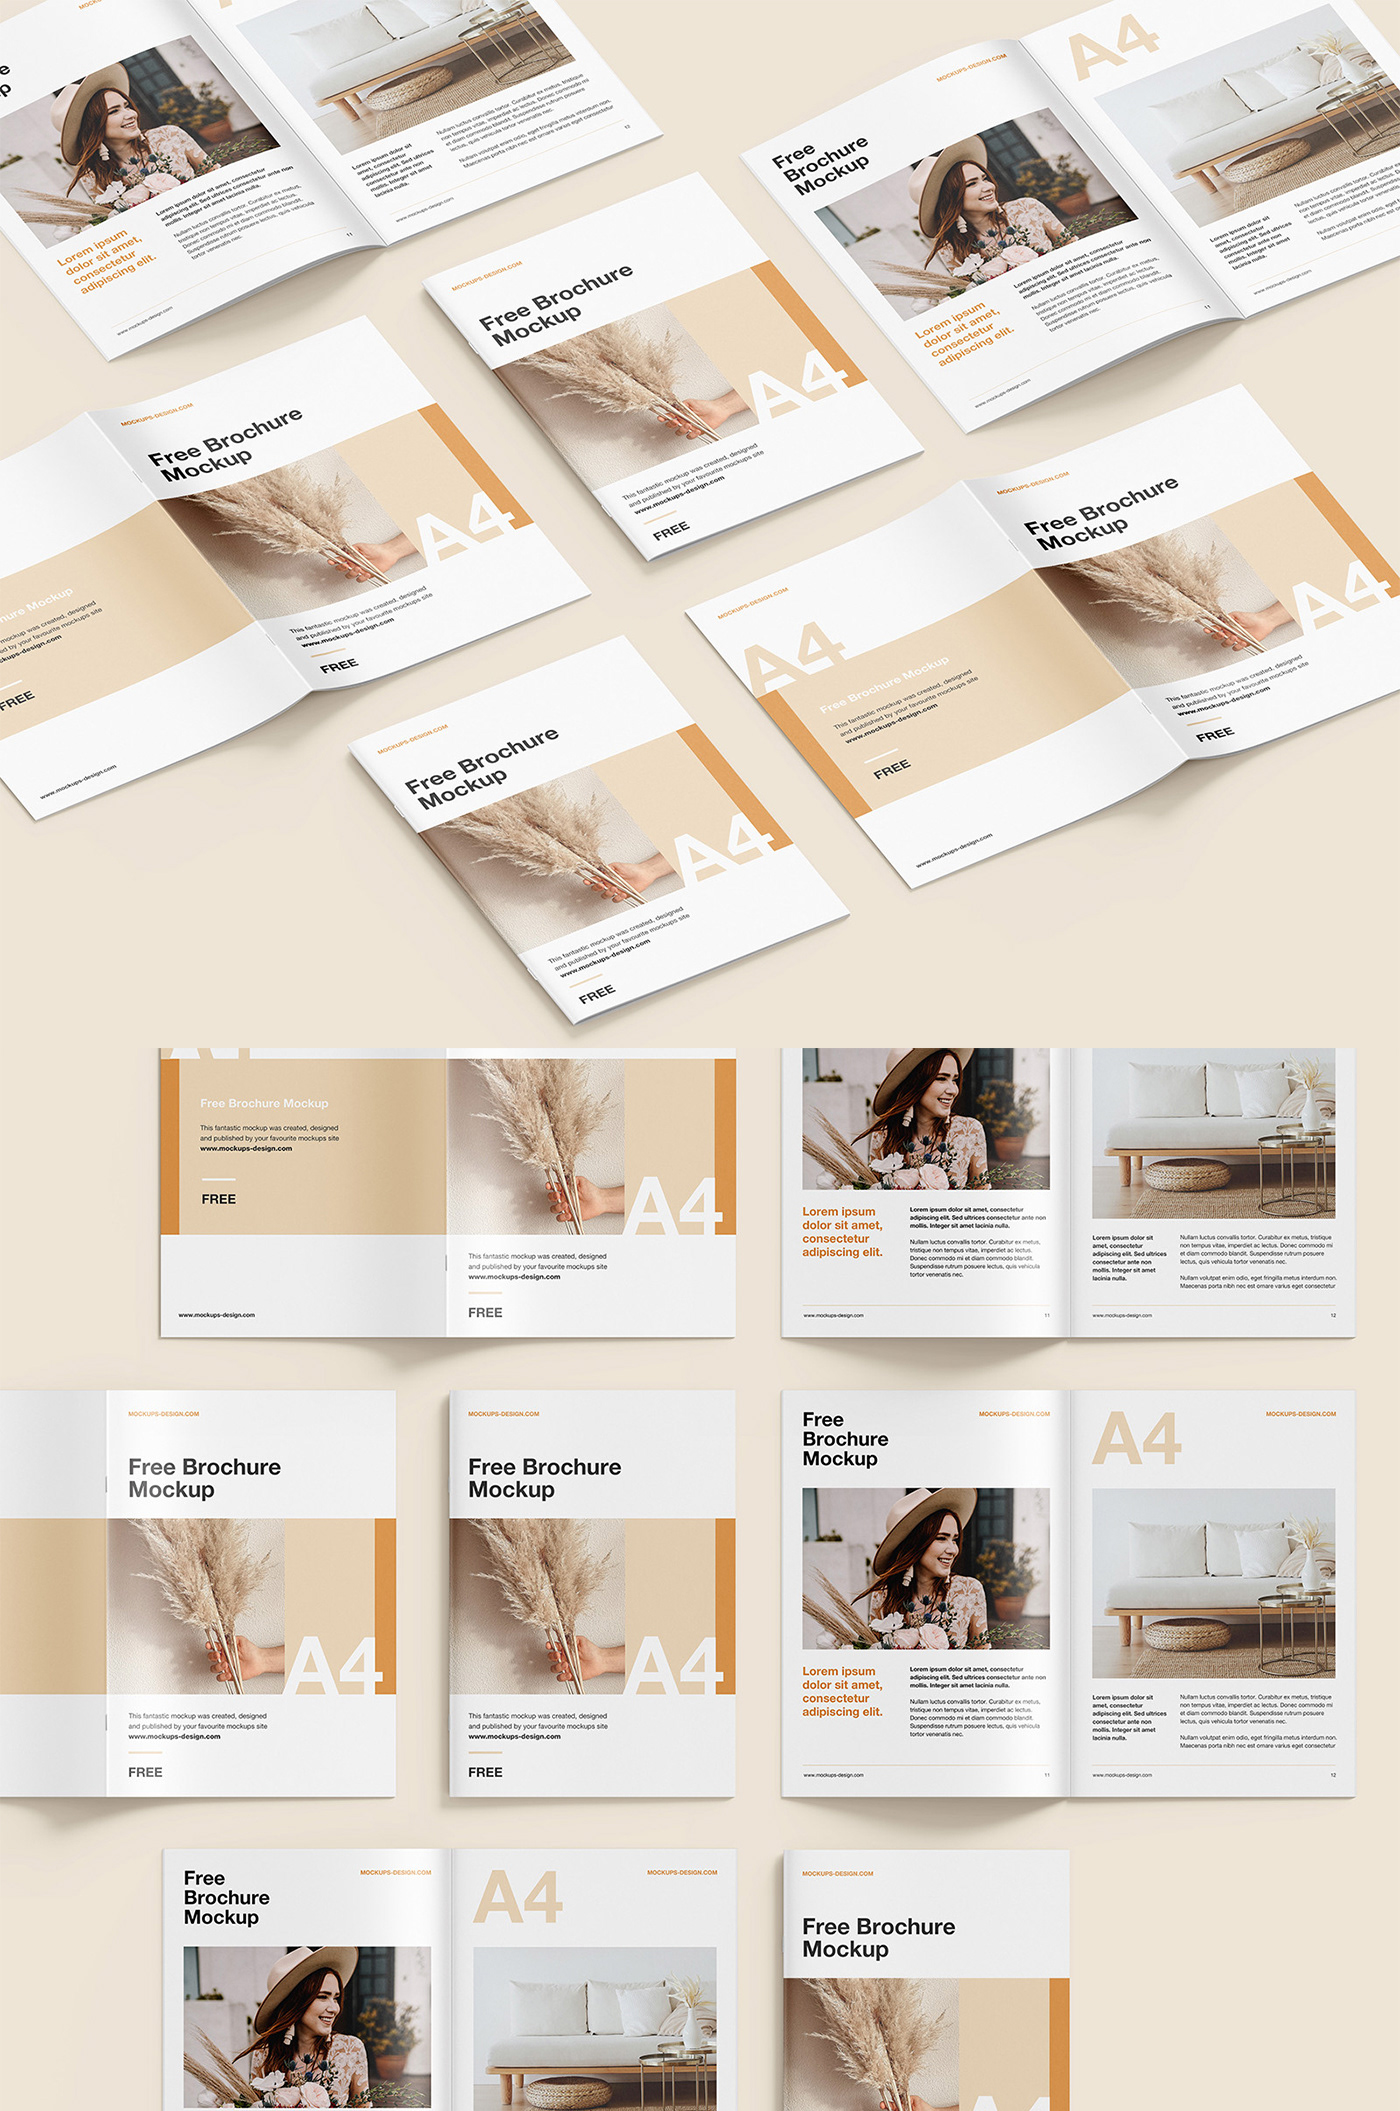 A4 Brochure Grid Mockup that comes in two high-resolution files with endless possibilities.